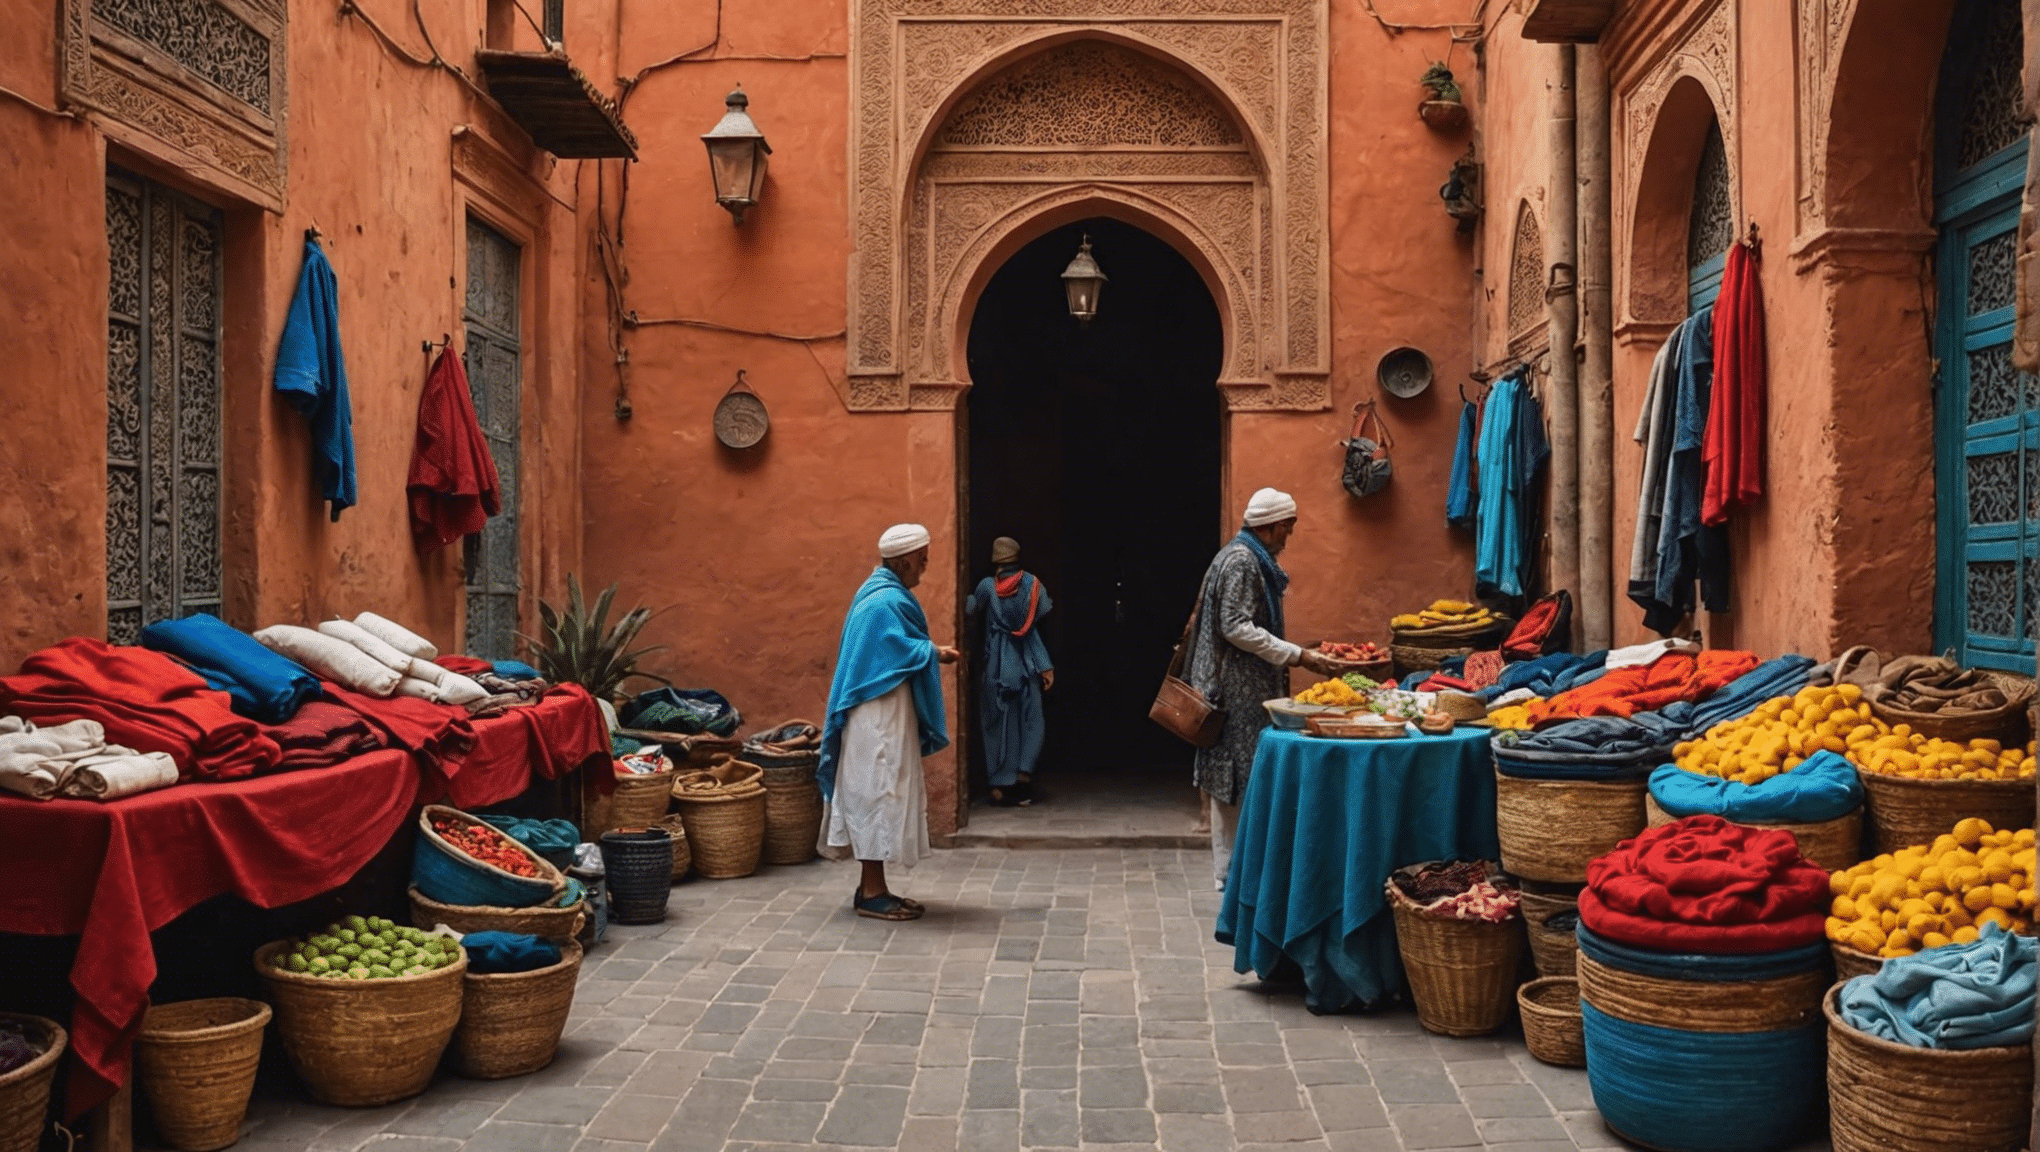 discover the essential items to pack for your unforgettable marrakech adventure in april with our comprehensive guide.